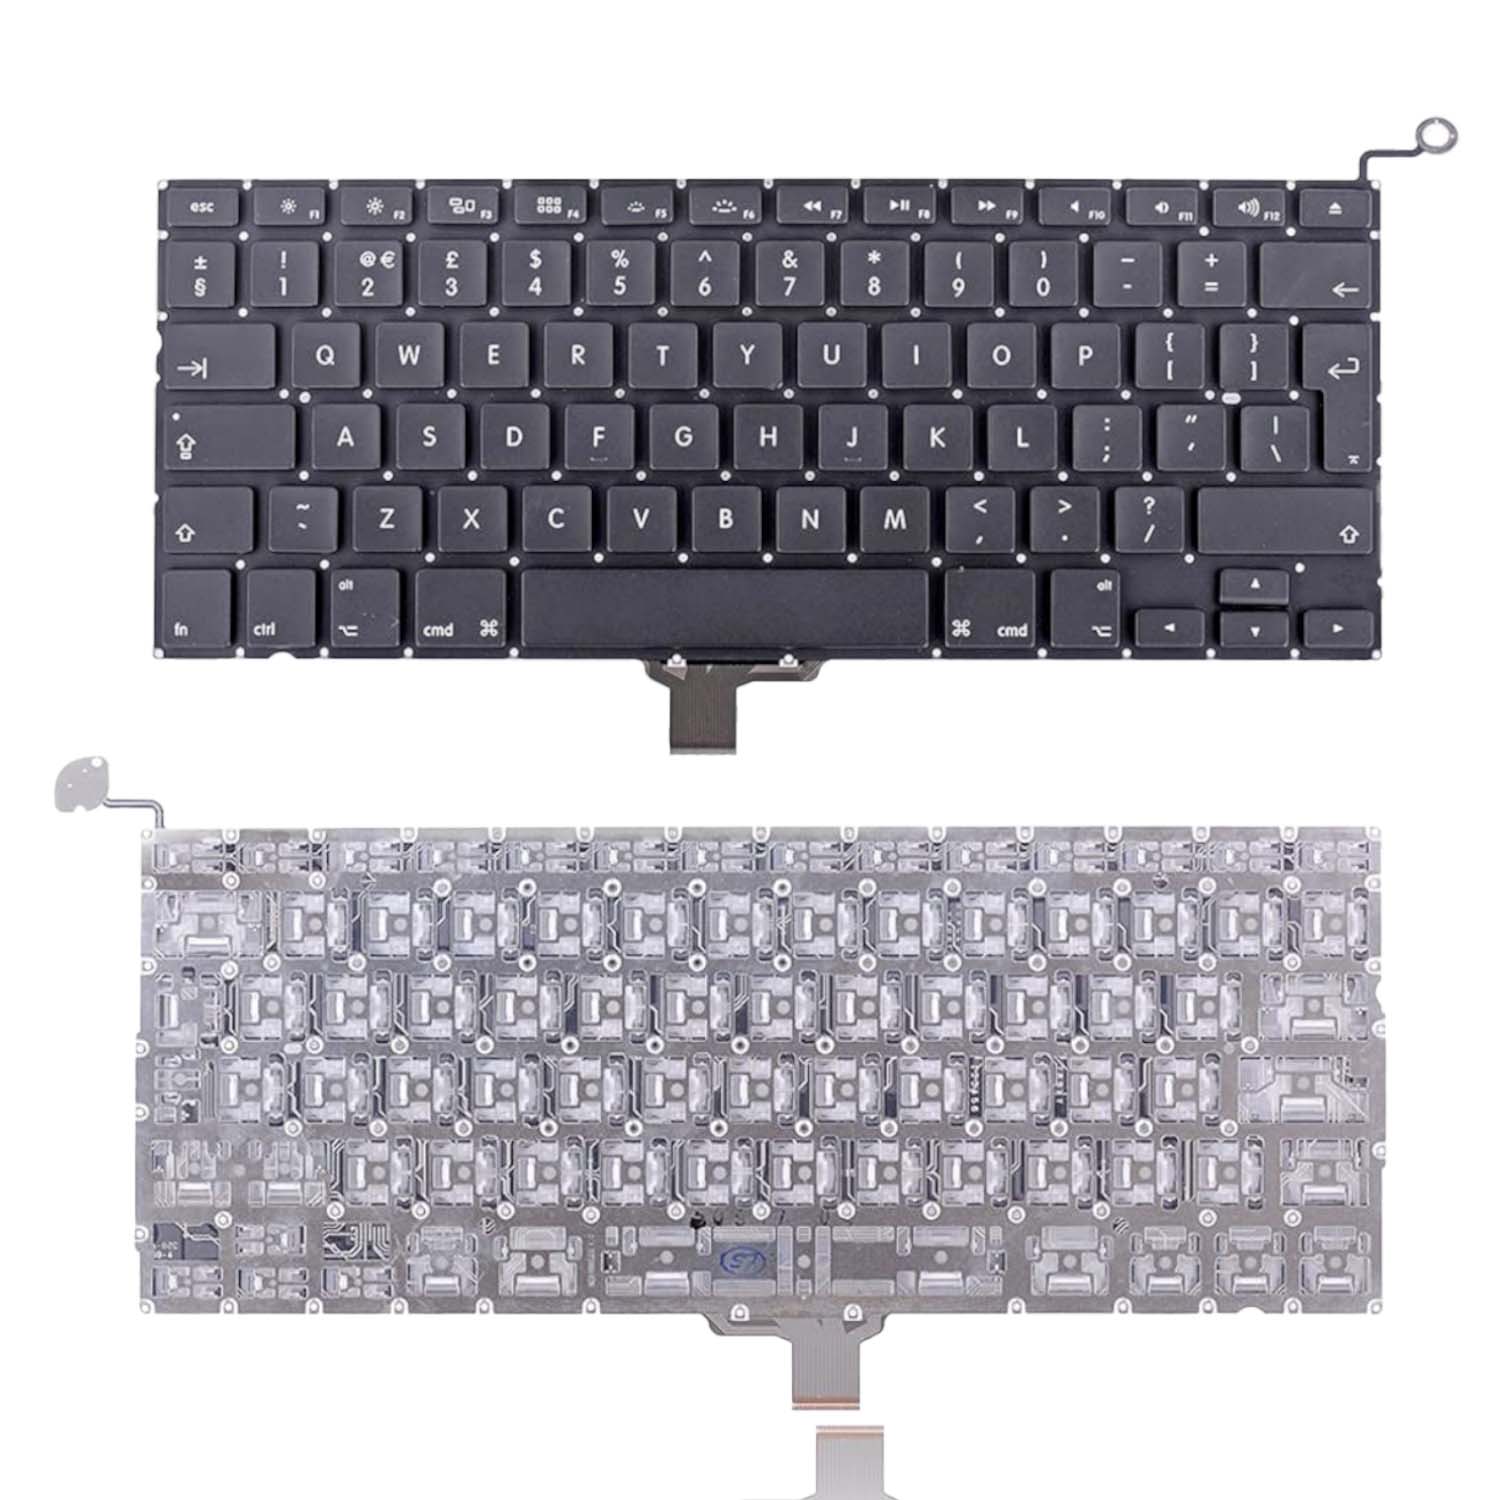 keyboard for A1278